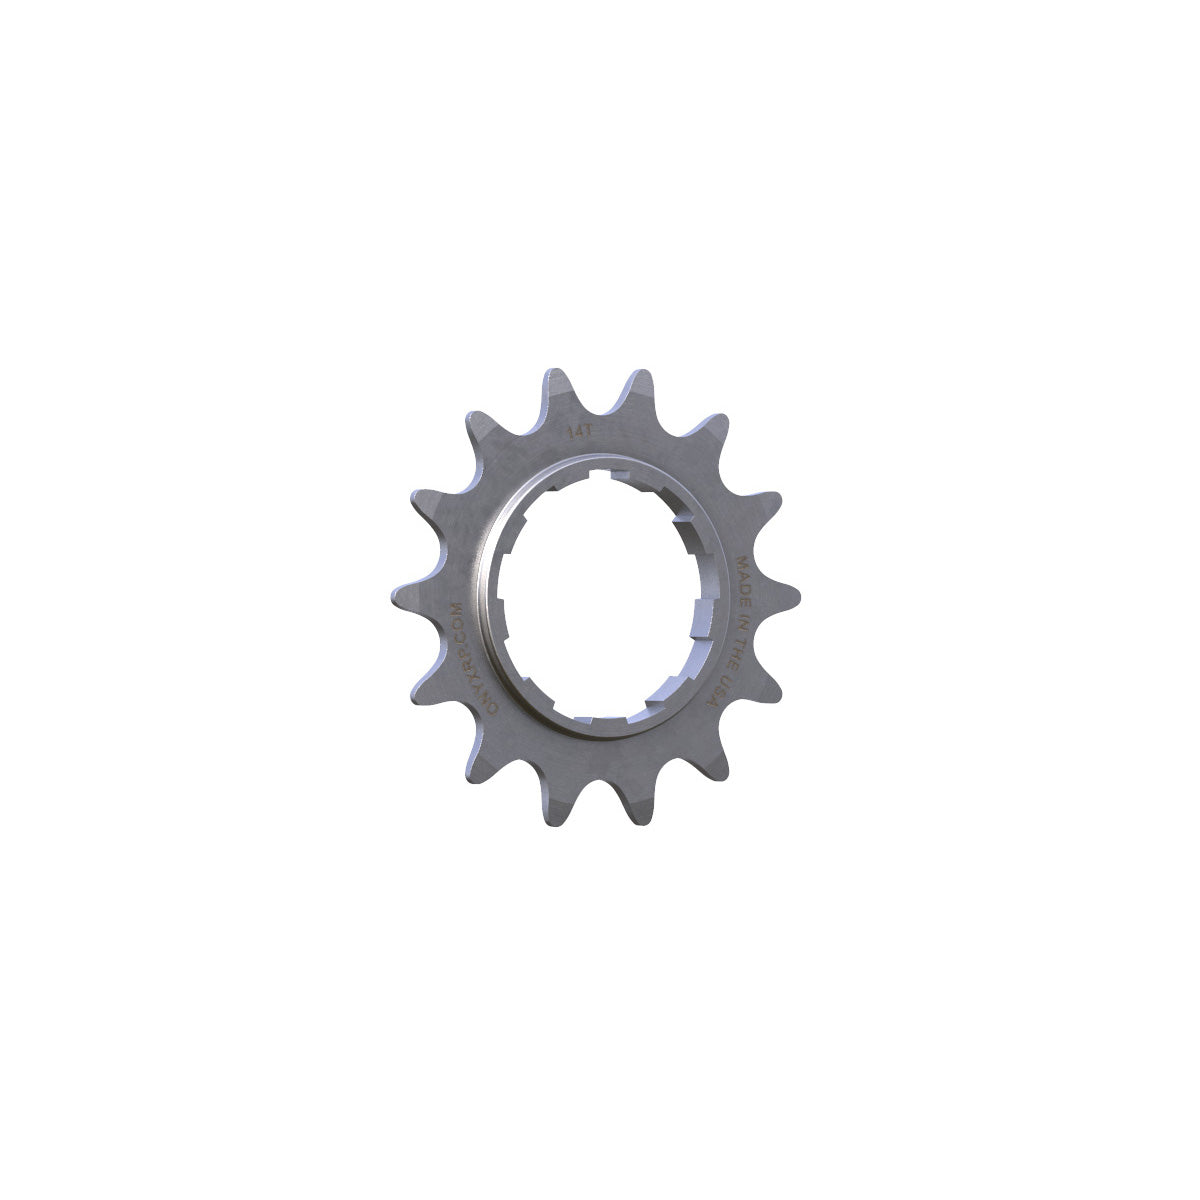 Onyx Racing 14t Stainless Steel Cog for BMX Cassette hubs - 3/32"